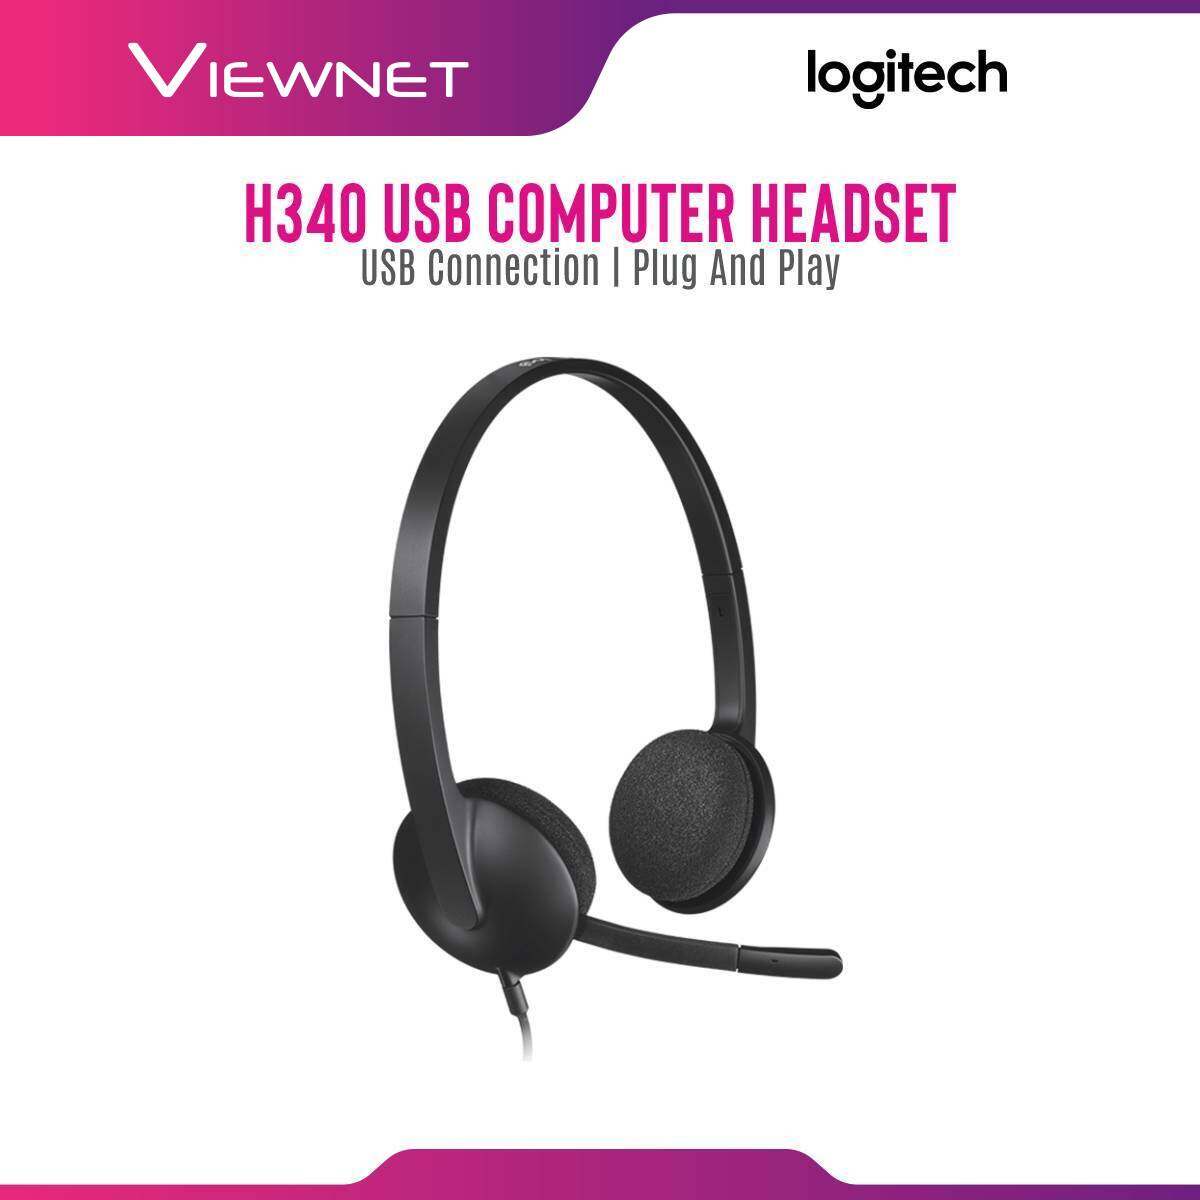 Logitech H340 USB Computer Headset with USB Connection, digital Stereo Sound, Noice Canceling Mic, Adjustable Headband(981-000477)